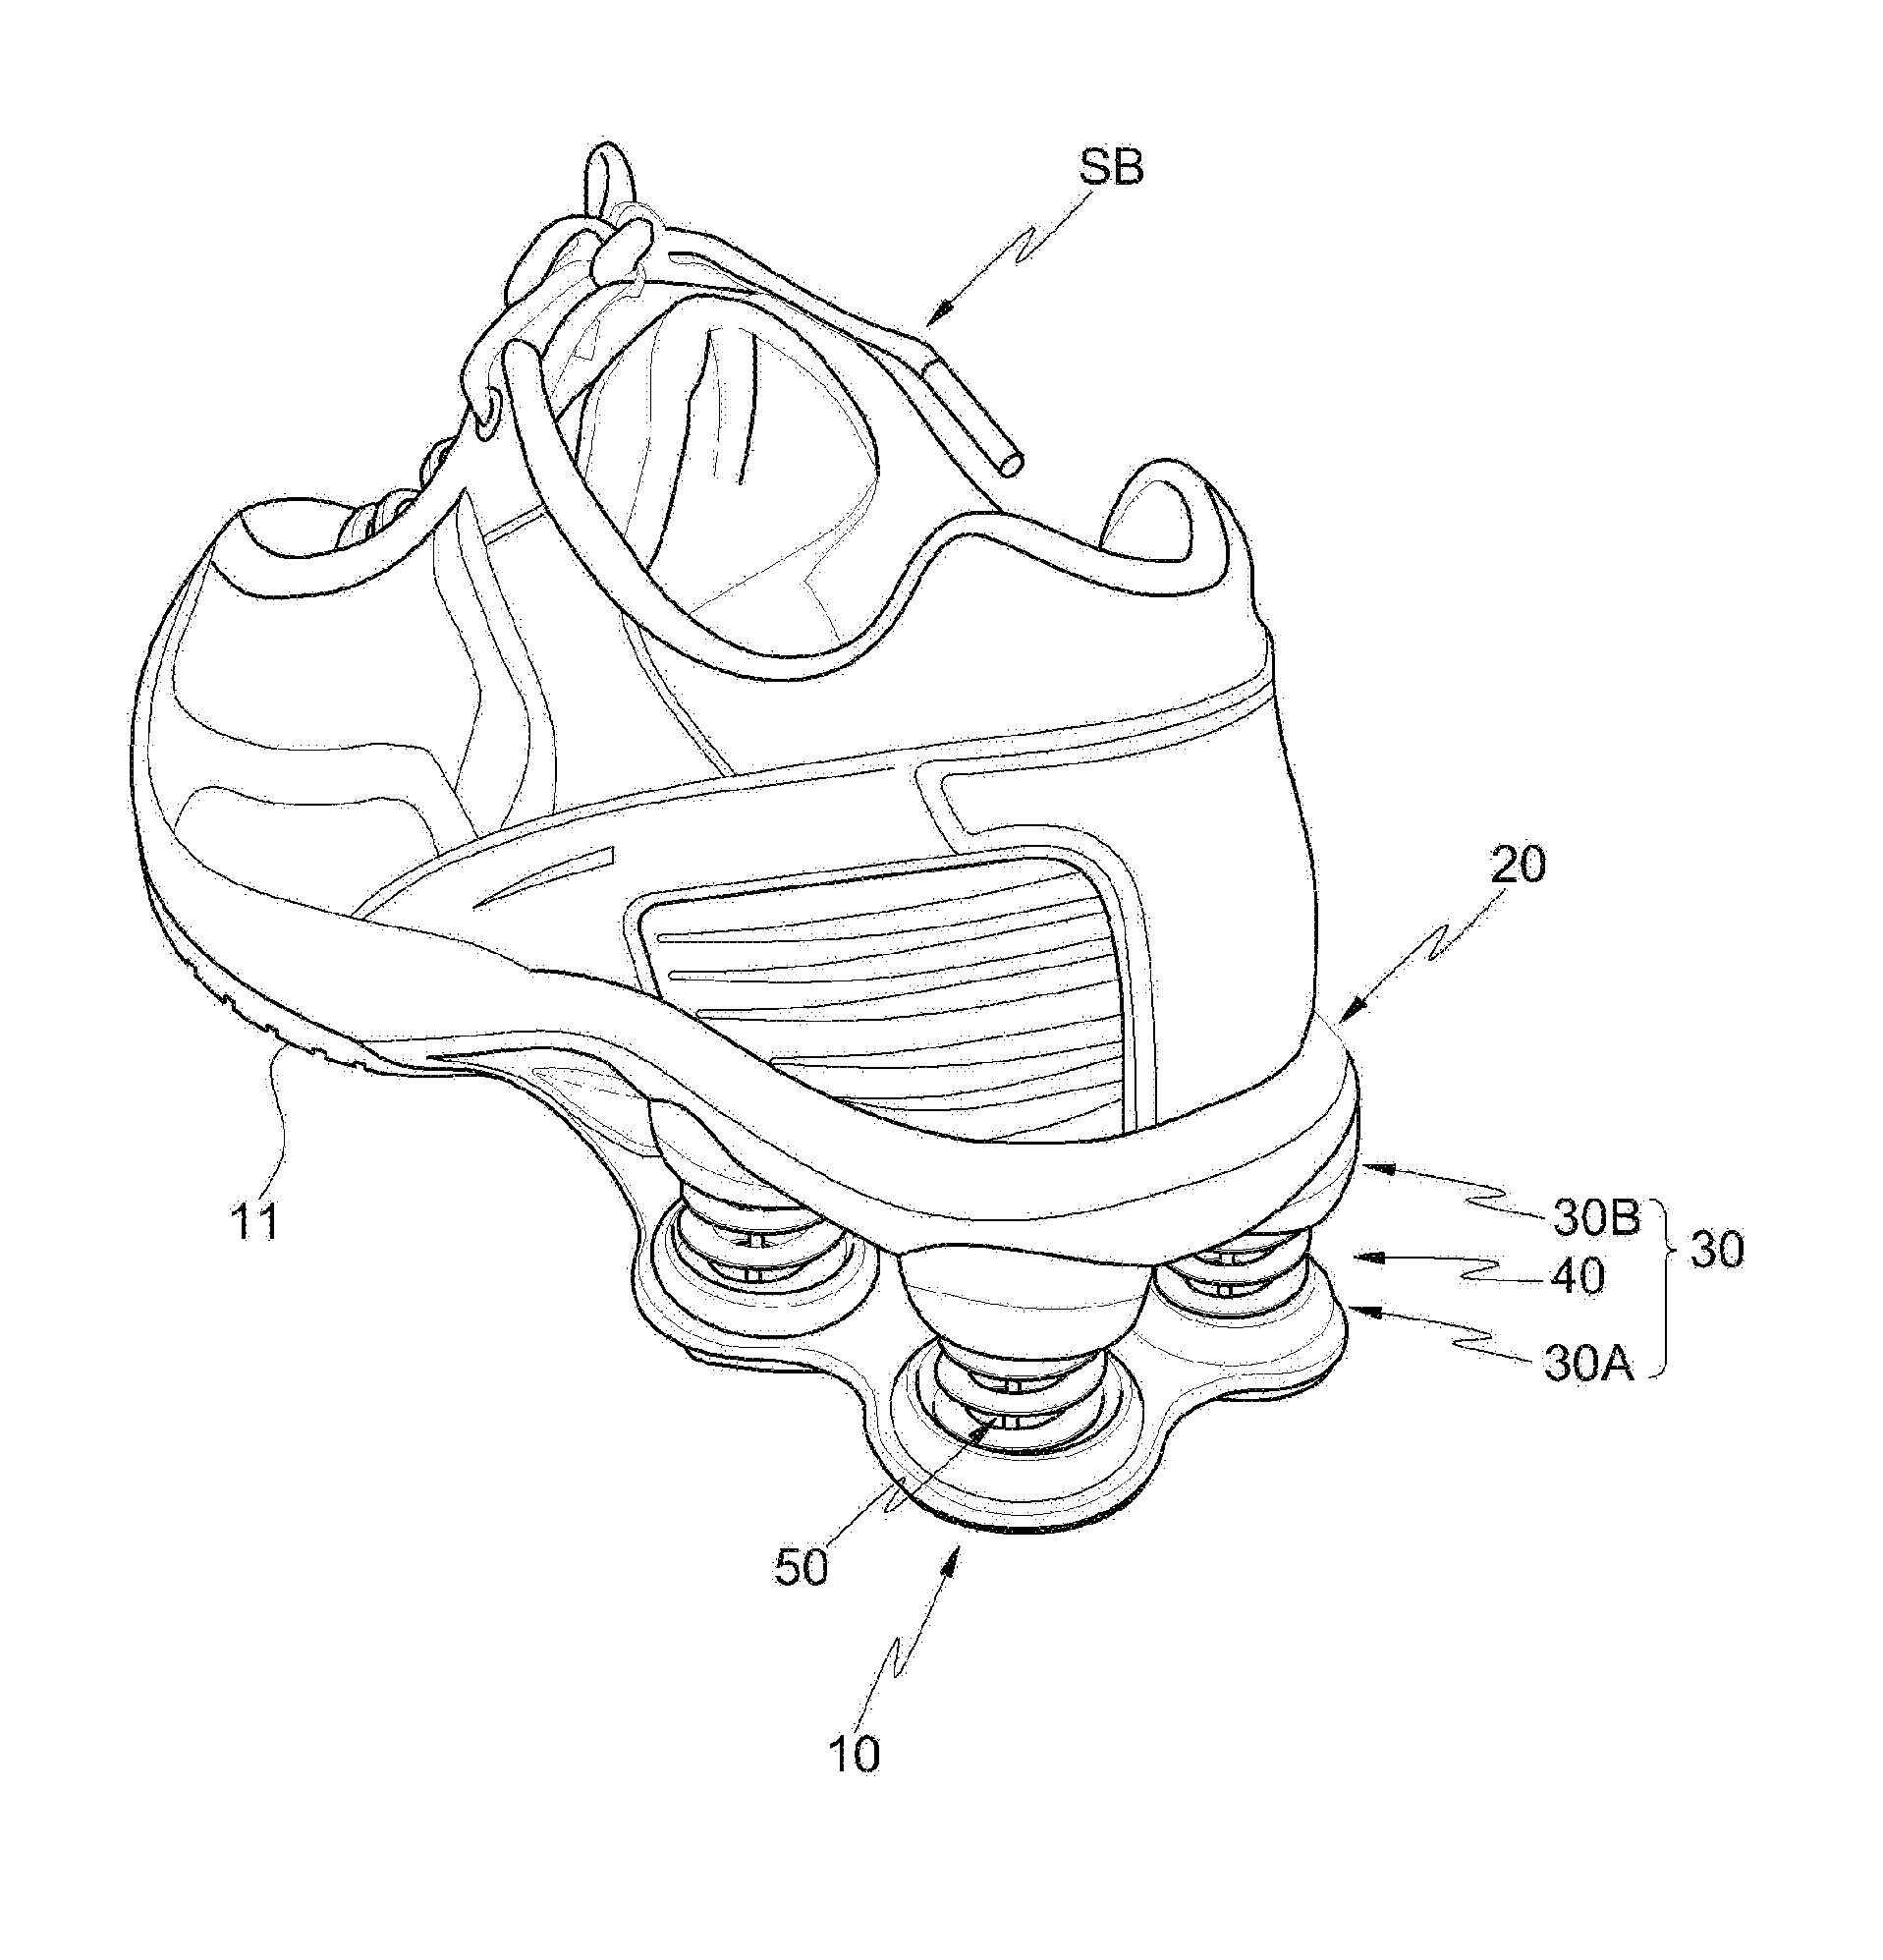 Shock absorbing shoes with improved assembly and operational performance